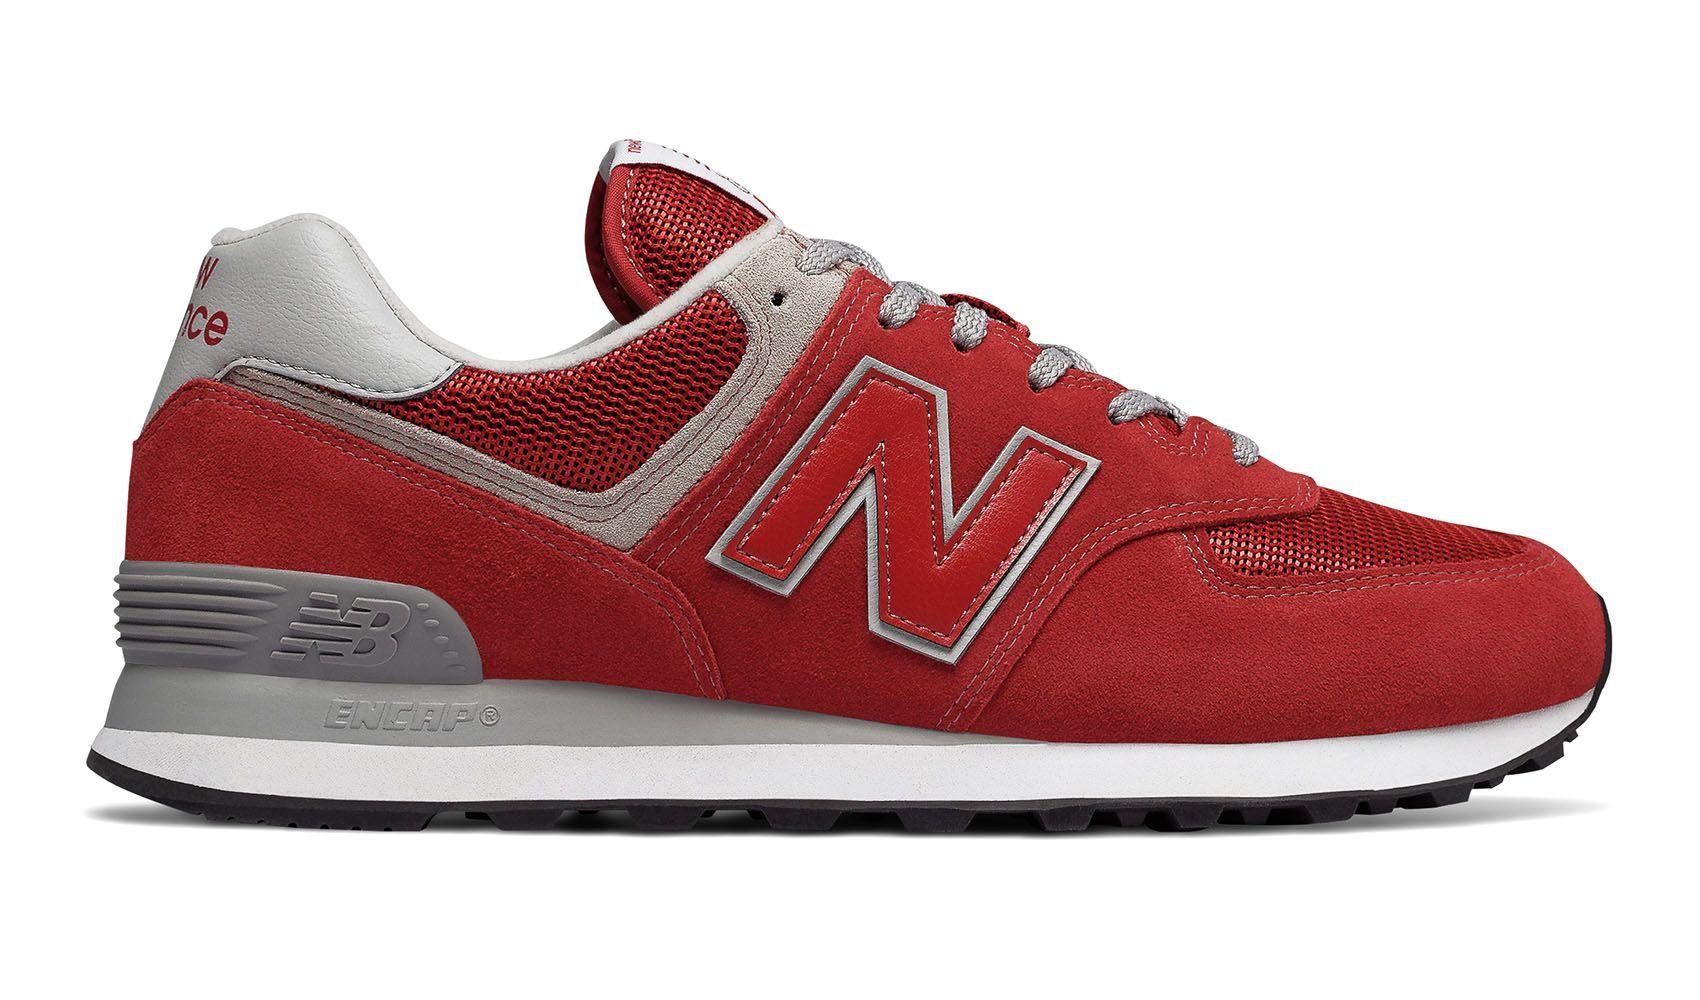 New Balance Red Suede Sneakers in Red for Men - Lyst